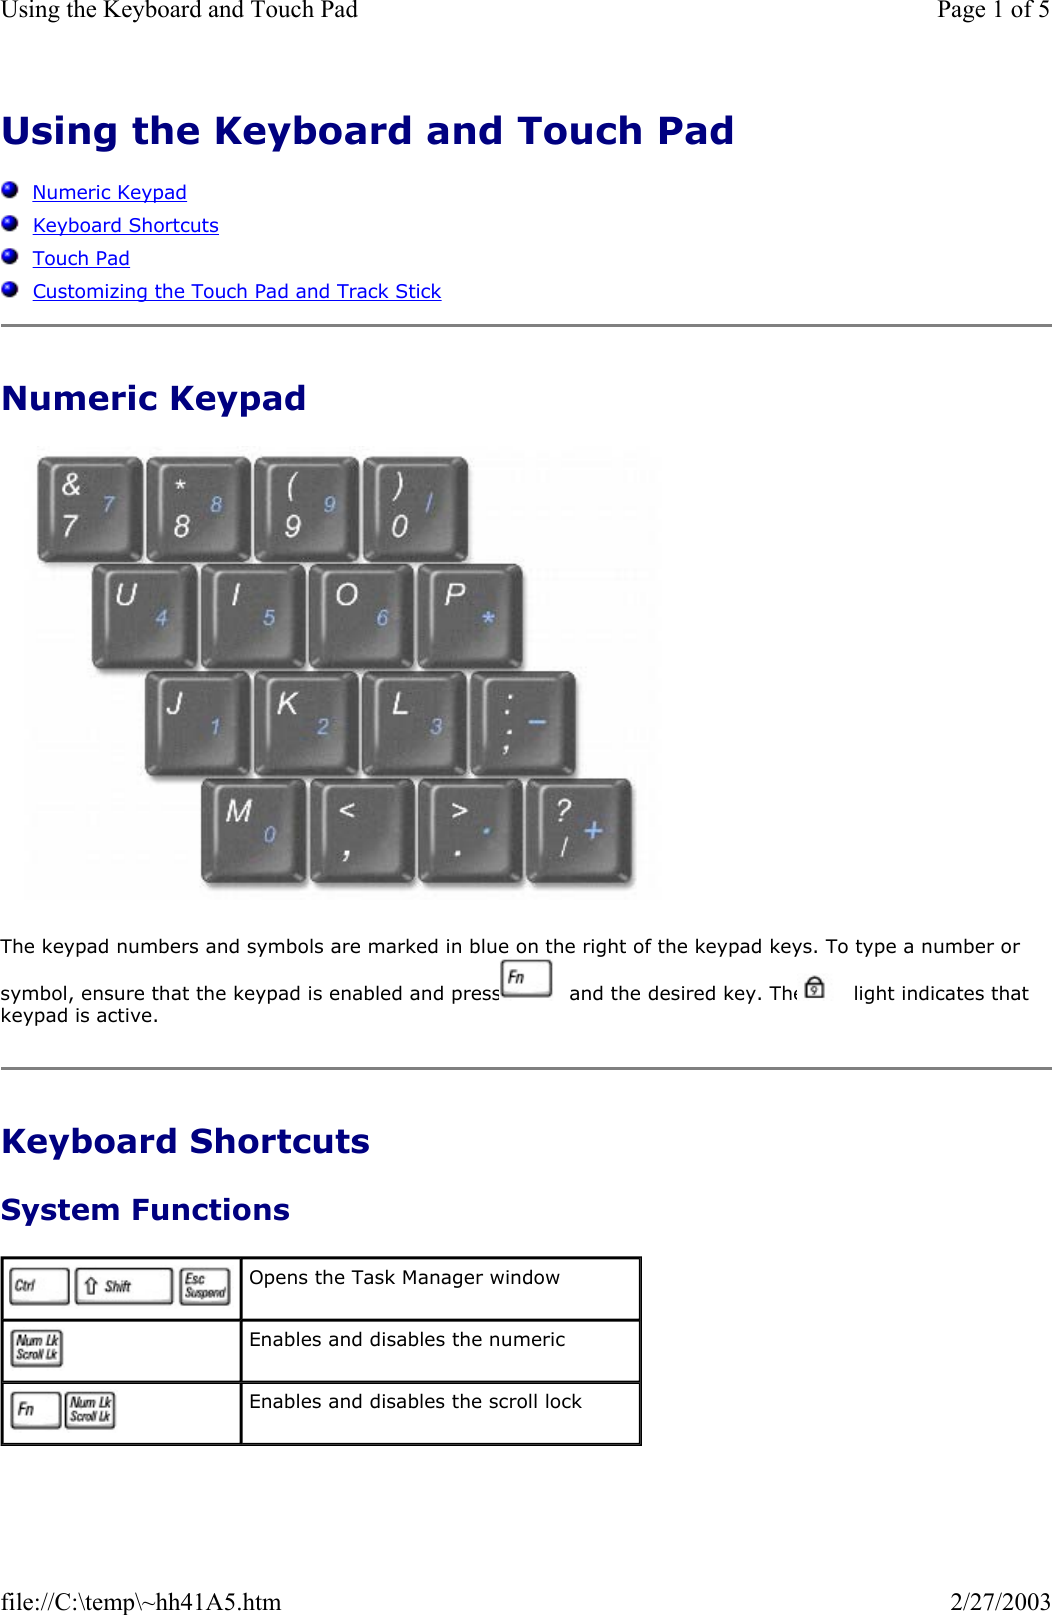 Using the Keyboard and Touch Pad      Numeric Keypad   Keyboard Shortcuts   Touch Pad   Customizing the Touch Pad and Track Stick Numeric Keypad   The keypad numbers and symbols are marked in blue on the right of the keypad keys. To type a number or symbol, ensure that the keypad is enabled and press   and the desired key. The   light indicates that keypad is active. Keyboard Shortcuts System Functions  Opens the Task Manager window   Enables and disables the numeric   Enables and disables the scroll lock Page 1 of 5Using the Keyboard and Touch Pad2/27/2003file://C:\temp\~hh41A5.htm